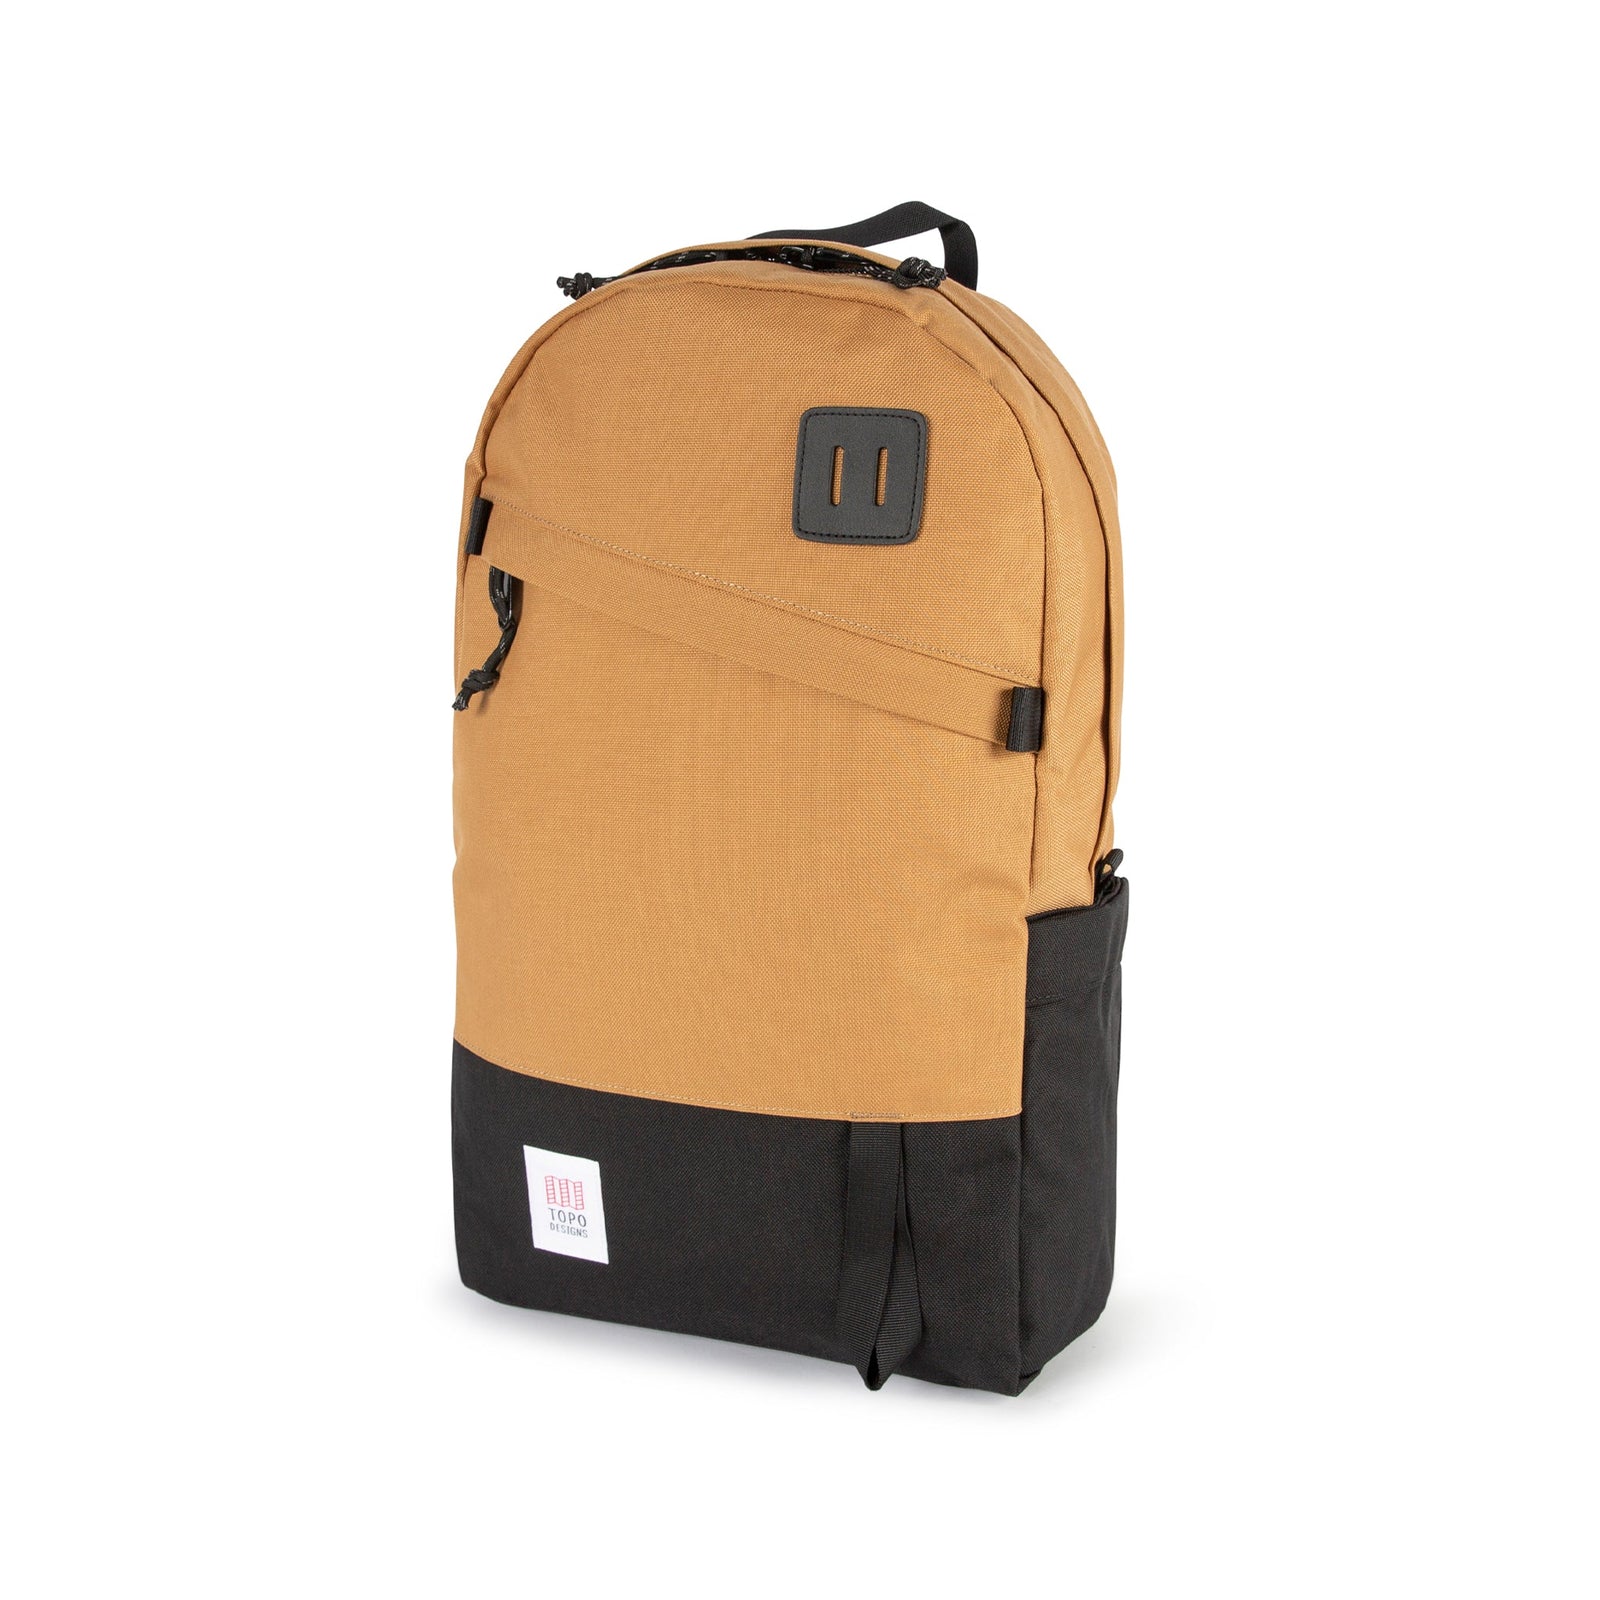 Topo Designs Daypack Classic 100% recycled nylon laptop backpack for work or school in "Khaki / Black".